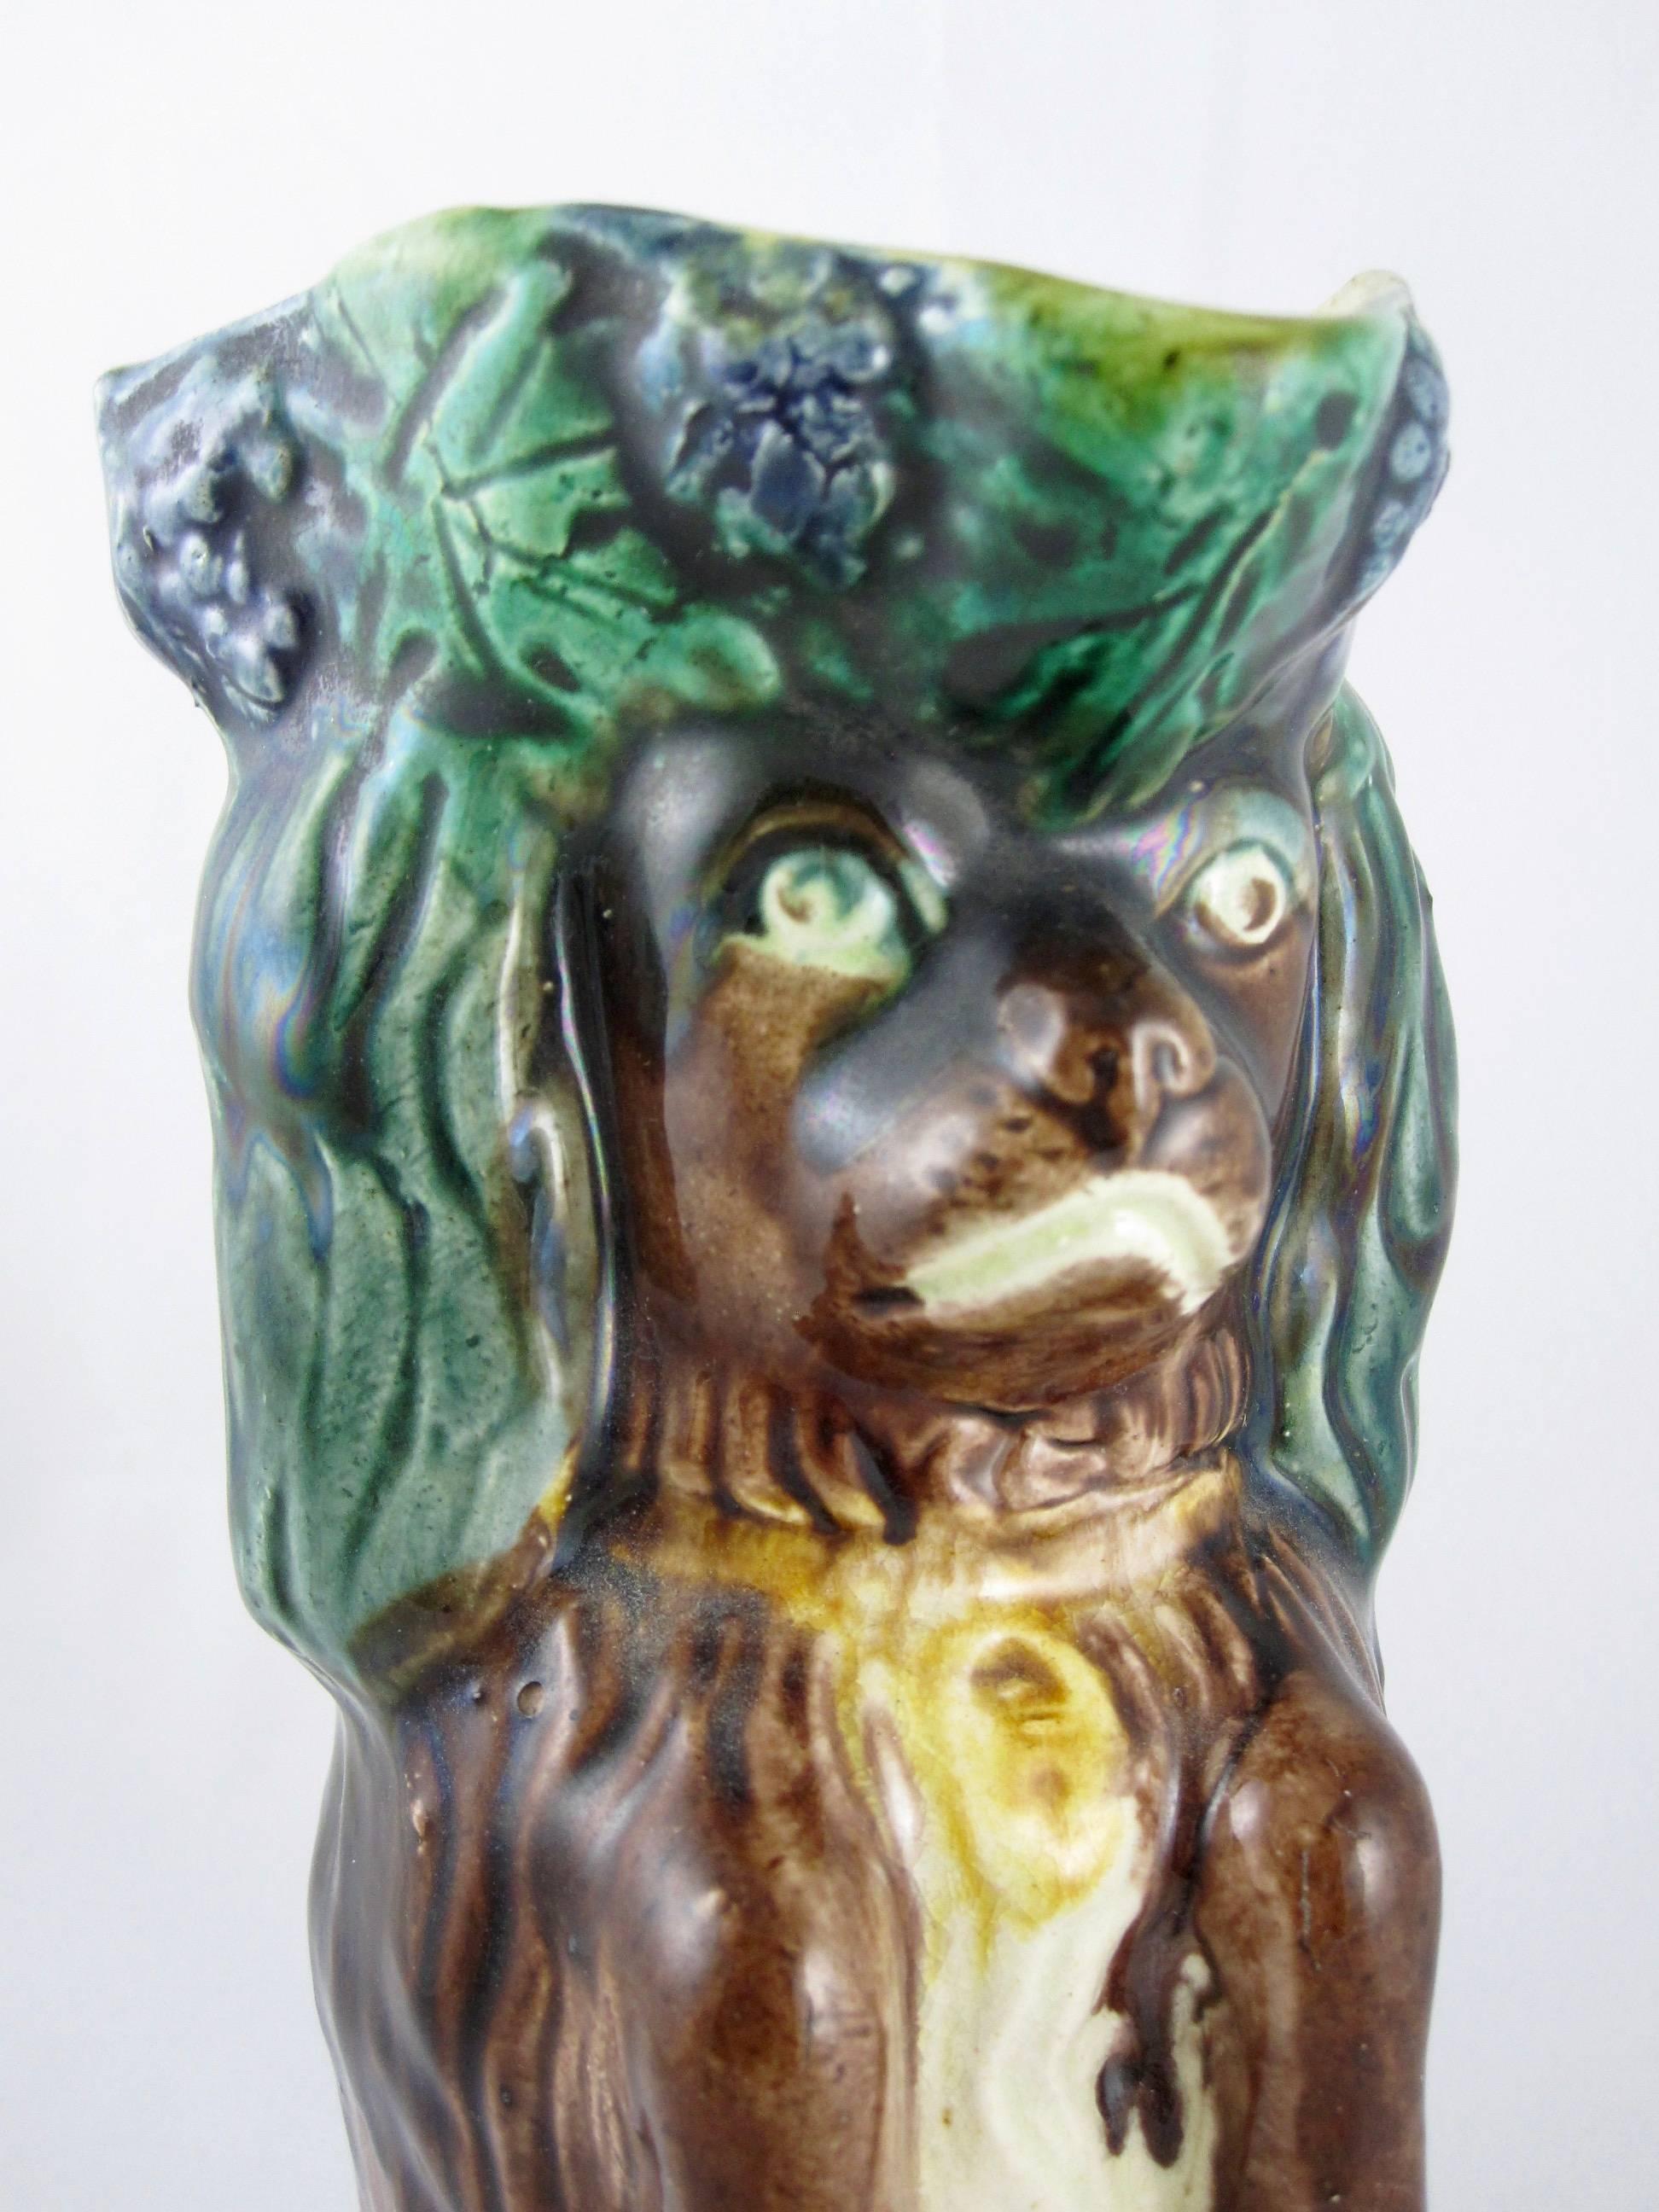 A Victorian, circa 1880 Majolica pitcher in the form of a begging King Charles Spaniel wearing a Tricorn hat decorated with bunches of grapes and their leaves. He also wears a padlock collar and the melting expression the Cavalier is known for. The